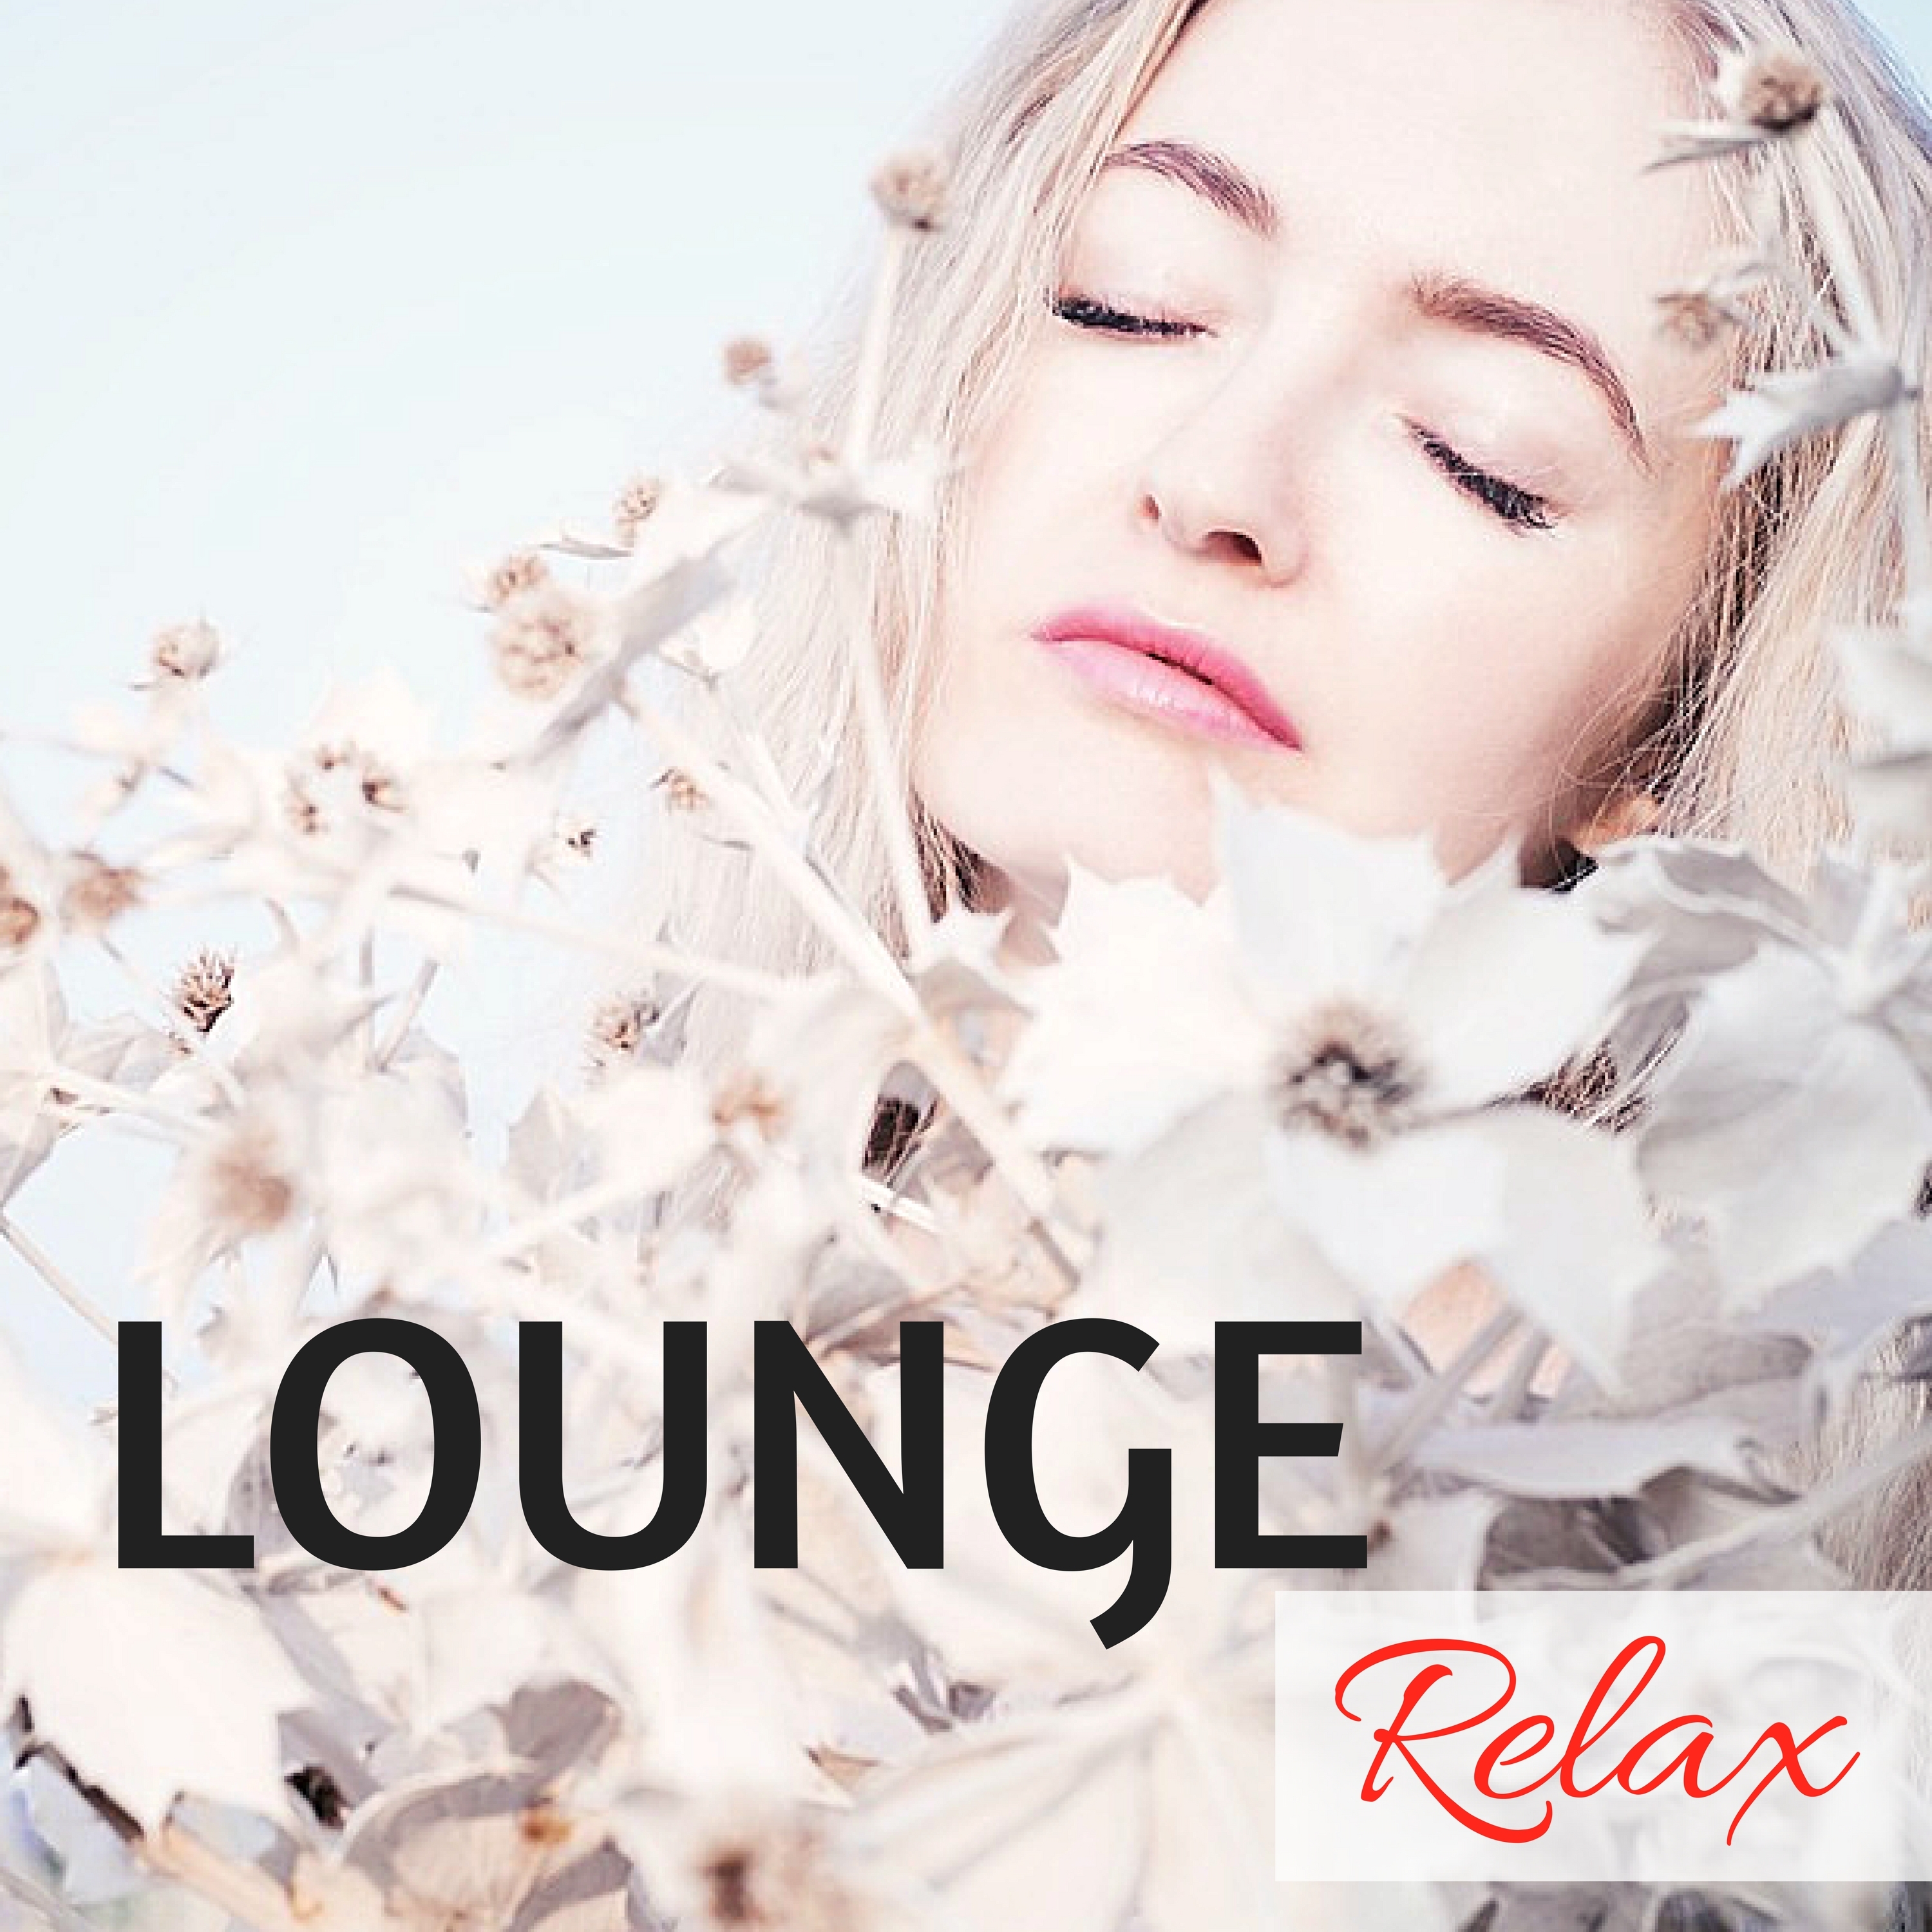 Lounge Relax - Best Playlist for Lounge Safari Buddha Chillout Do Mar Café